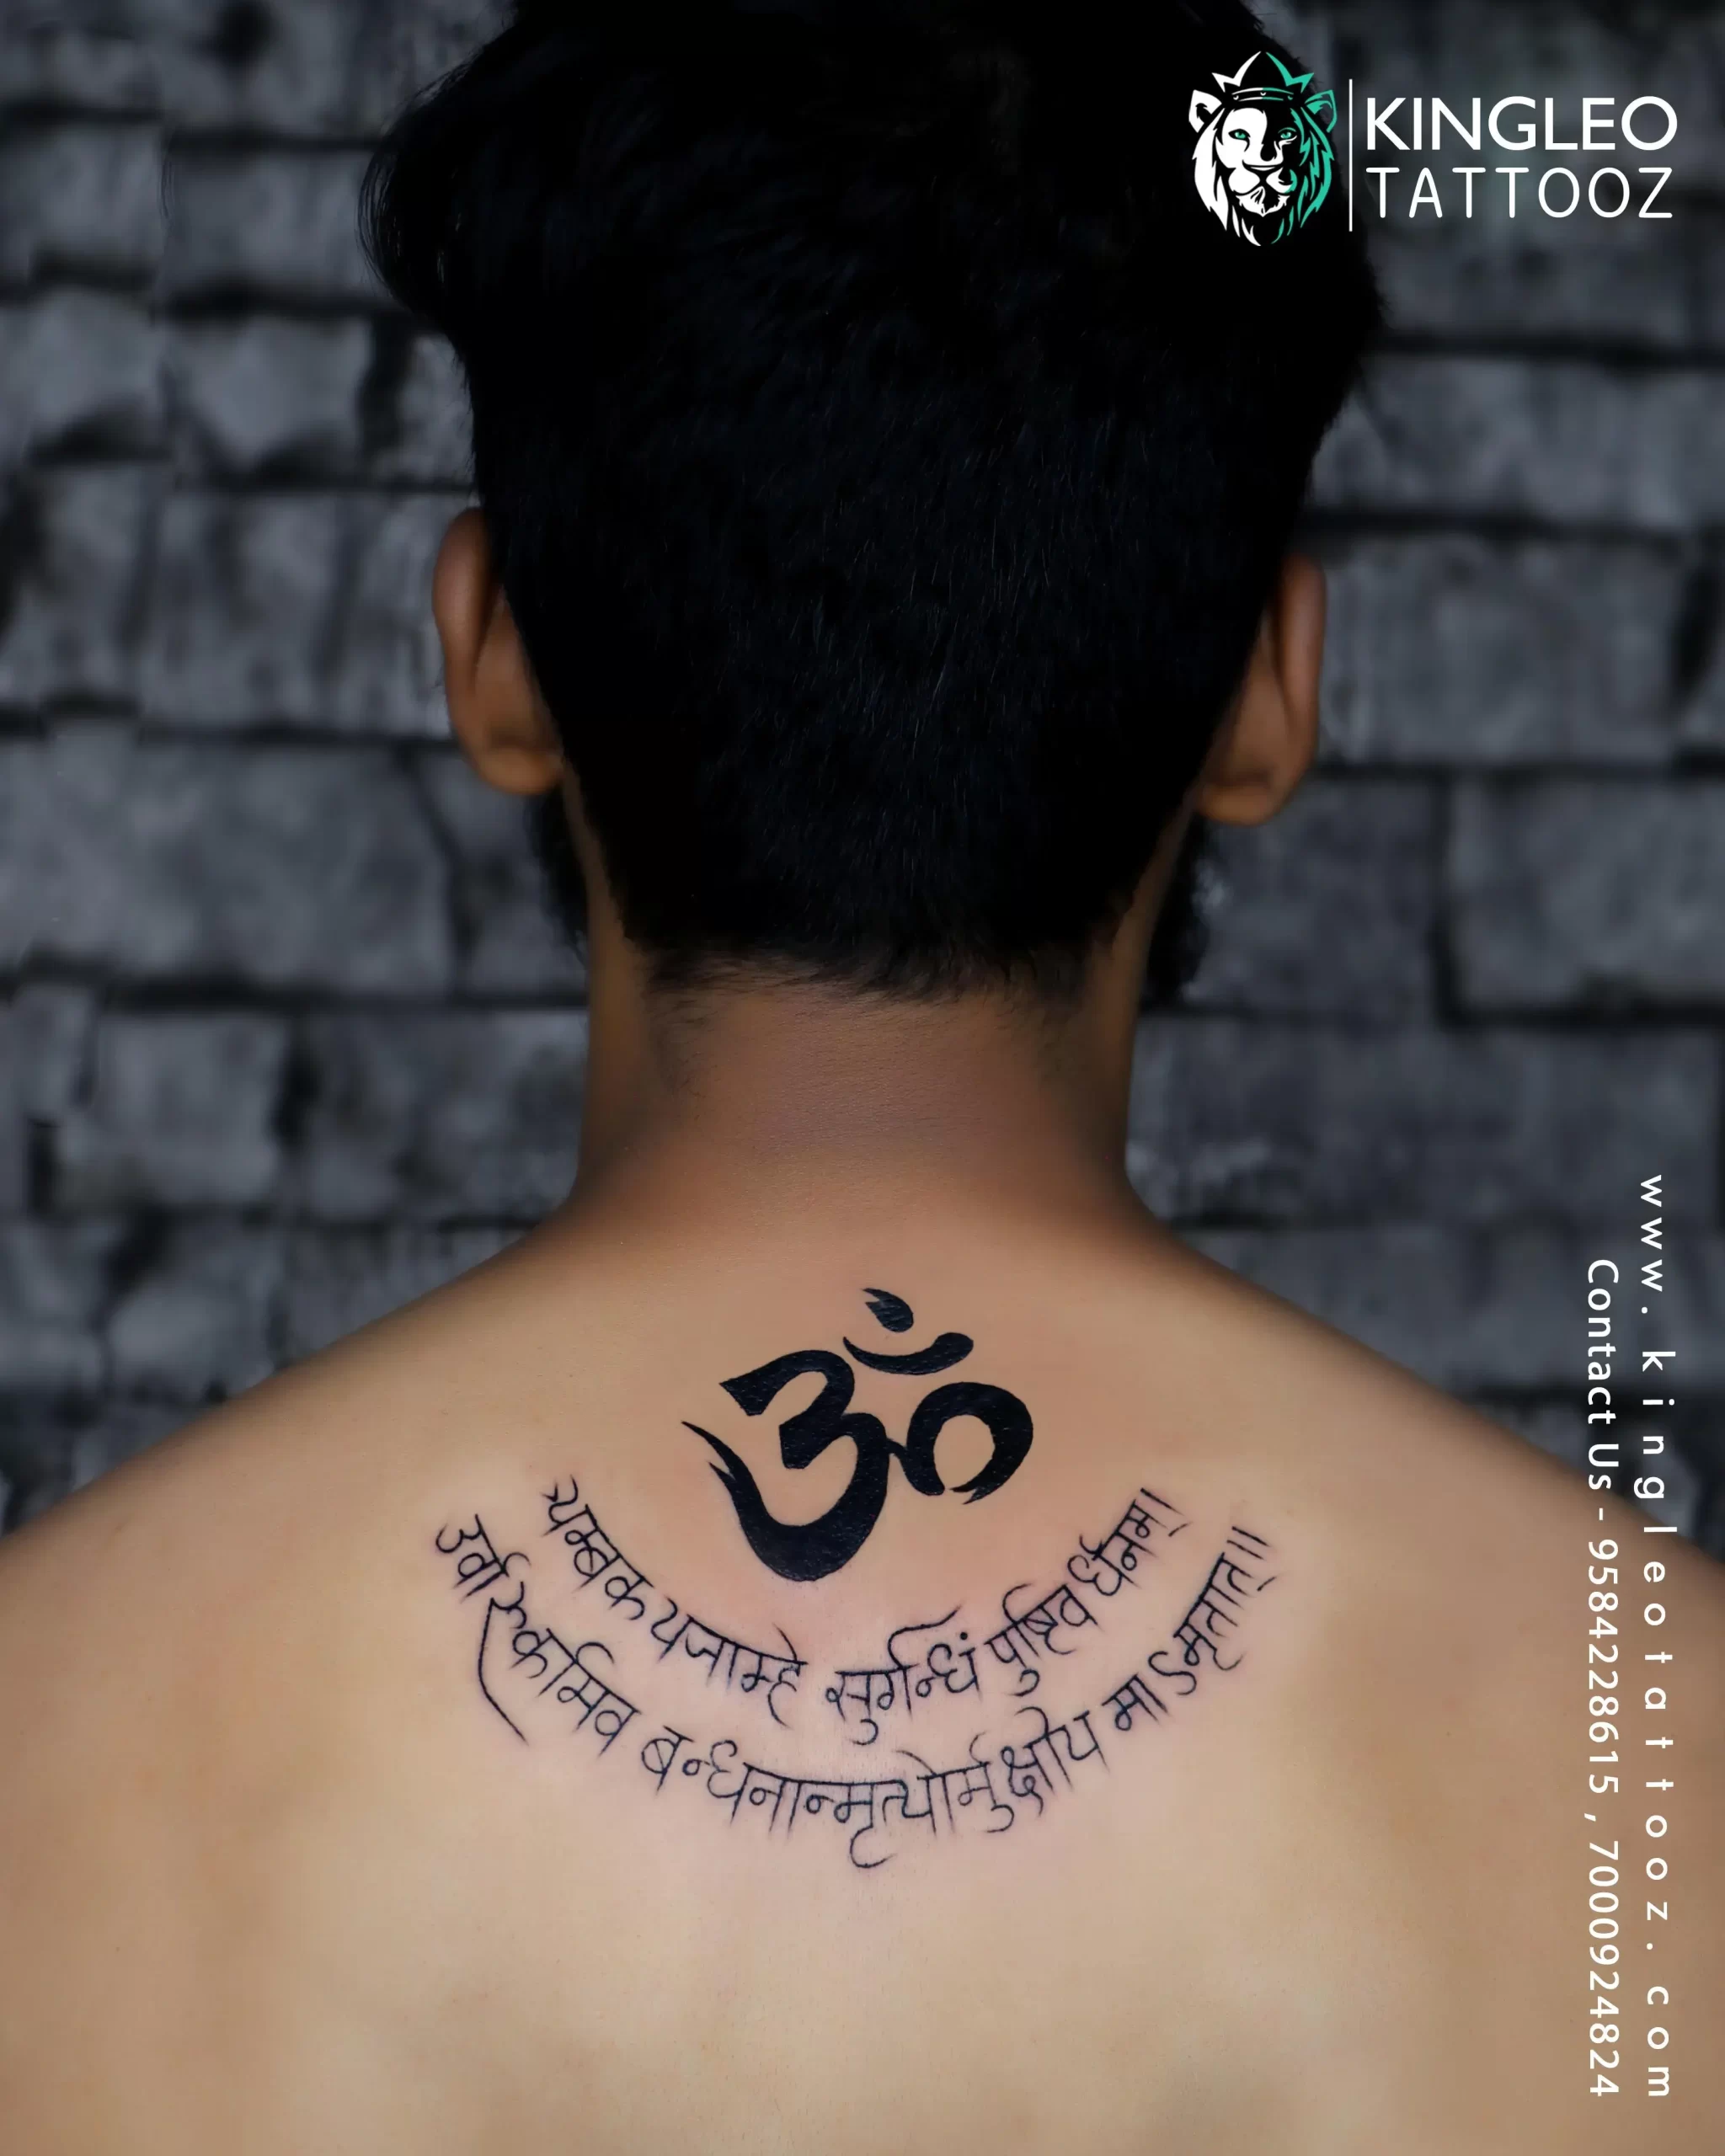 Can I put a Lord Shiva tattoo on my left hand? - Quora